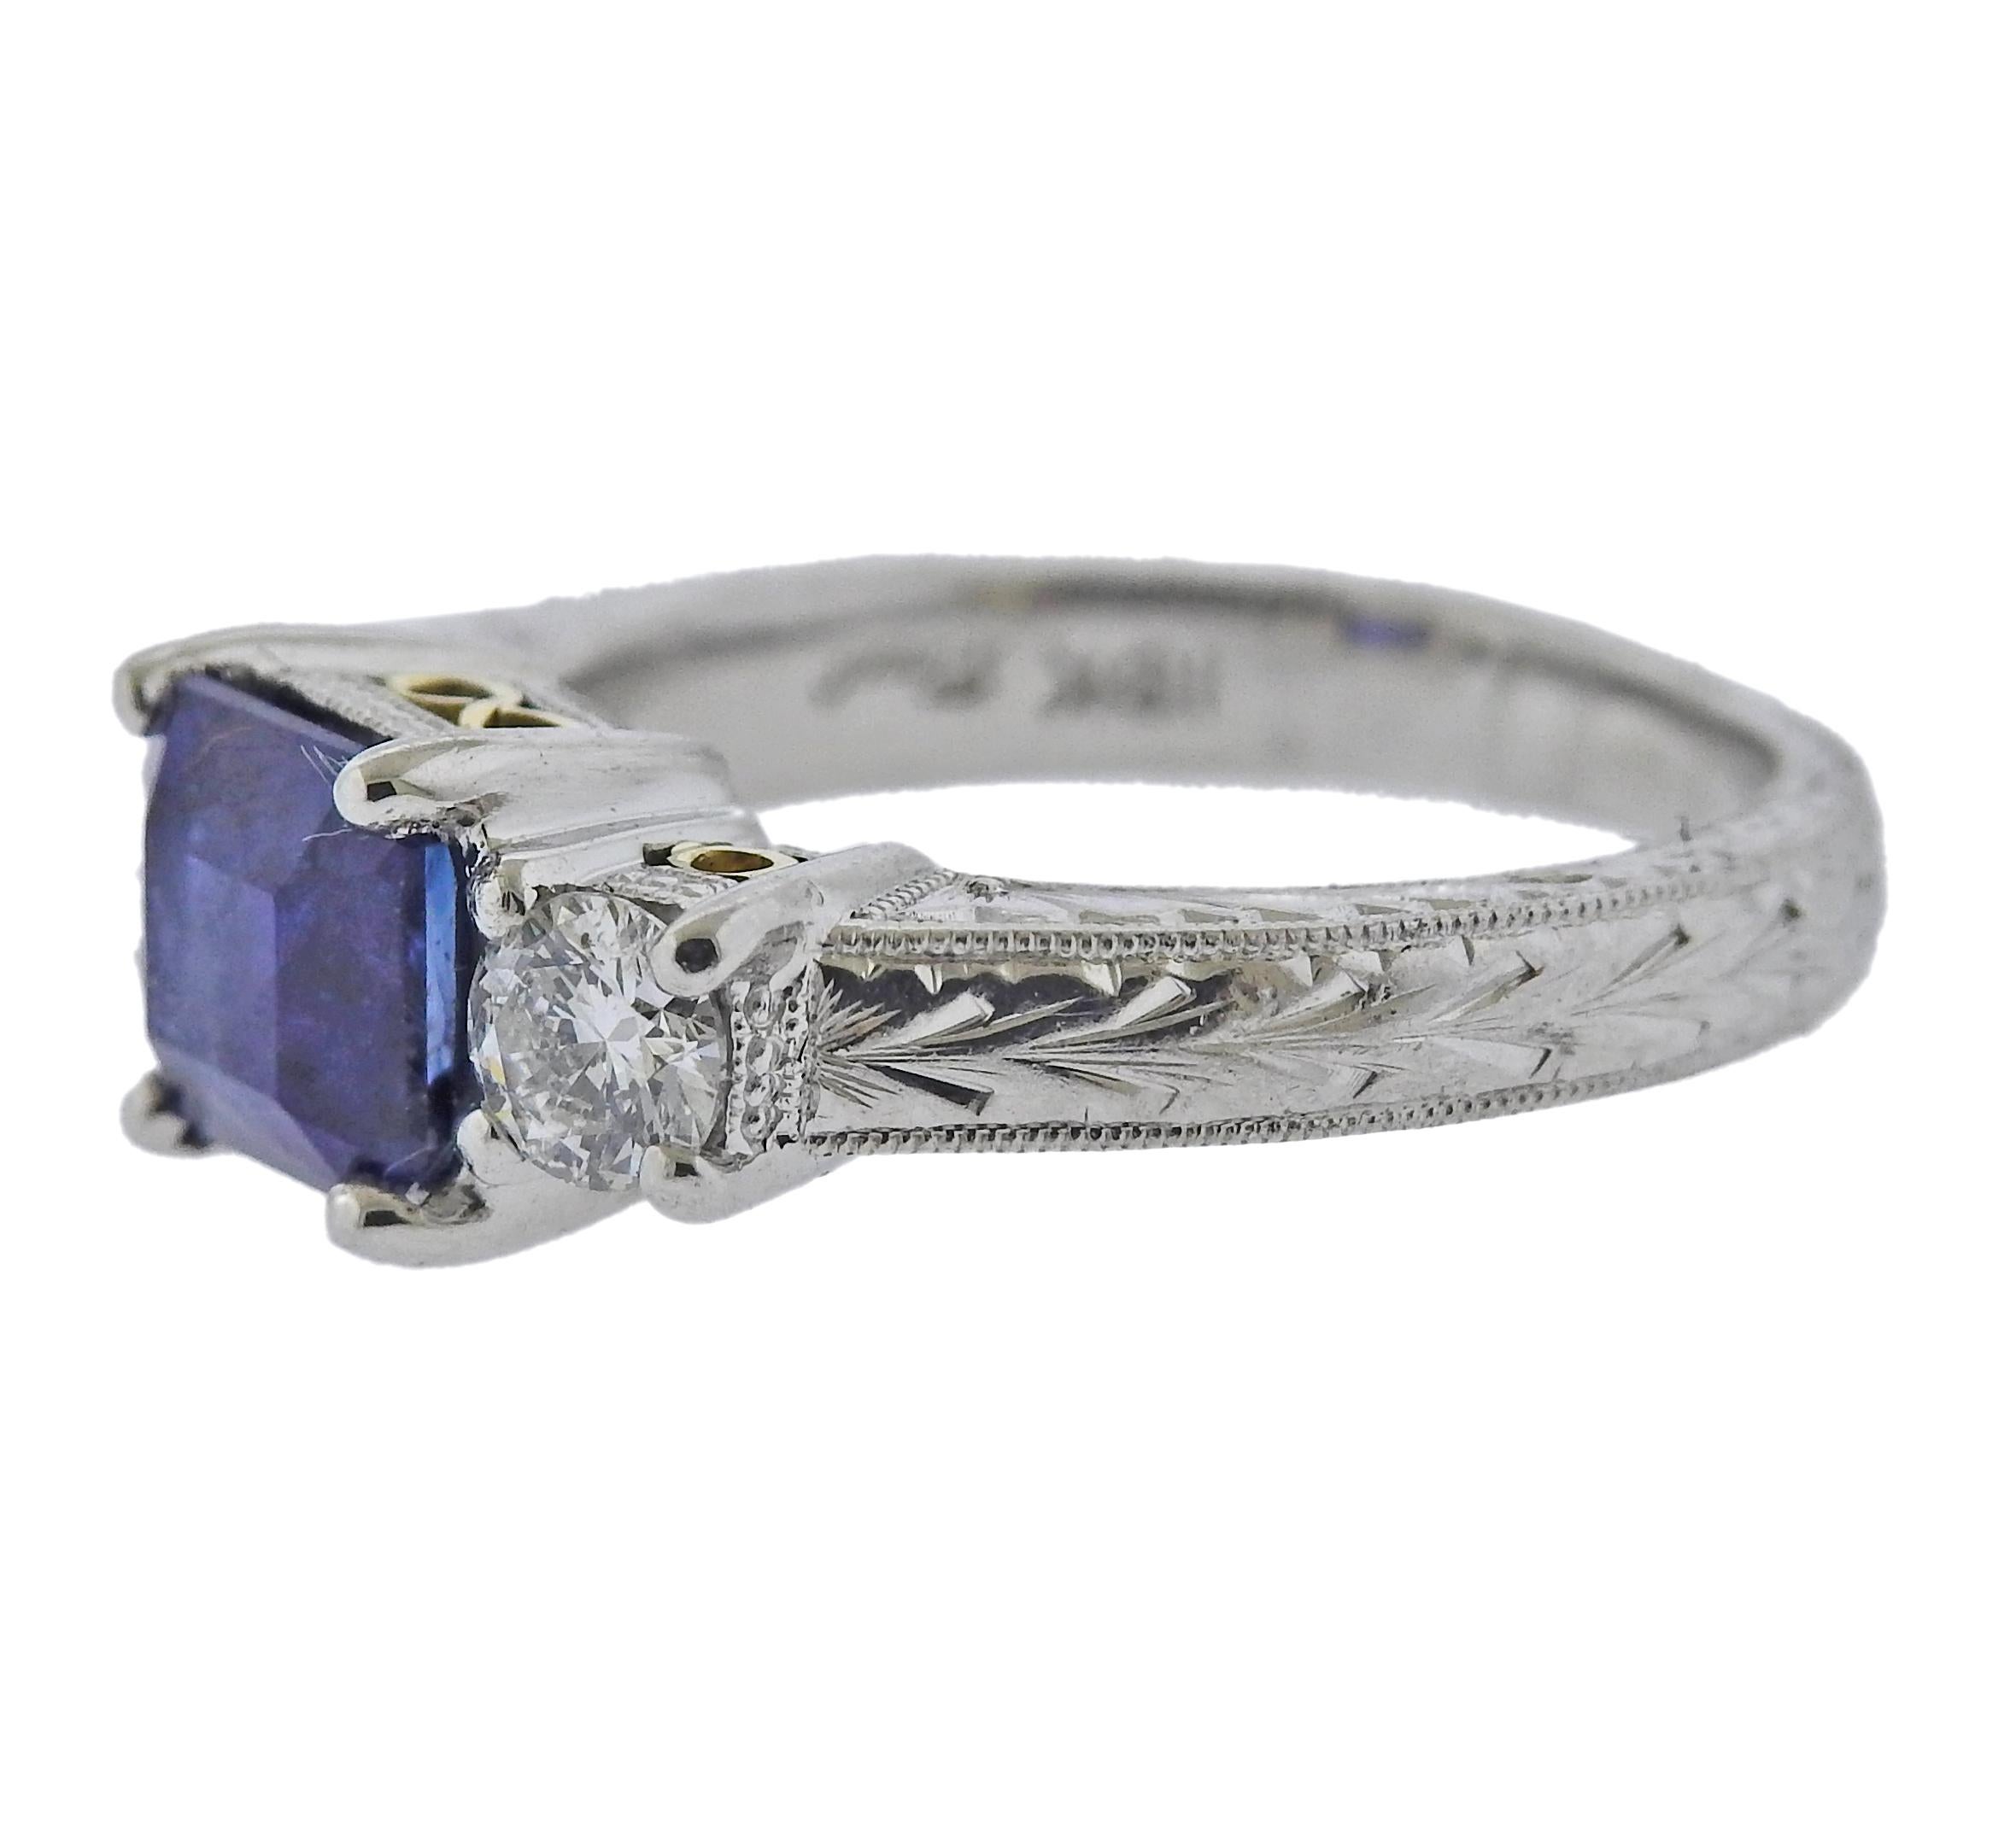 18k gold engagement ring with approx. 0.42ctw in diamonds and 6.13 x 6.3mm sapphire. Ring size 5 (EU 49).  Marked Coast, 18k. Weight 8.4 grams. 